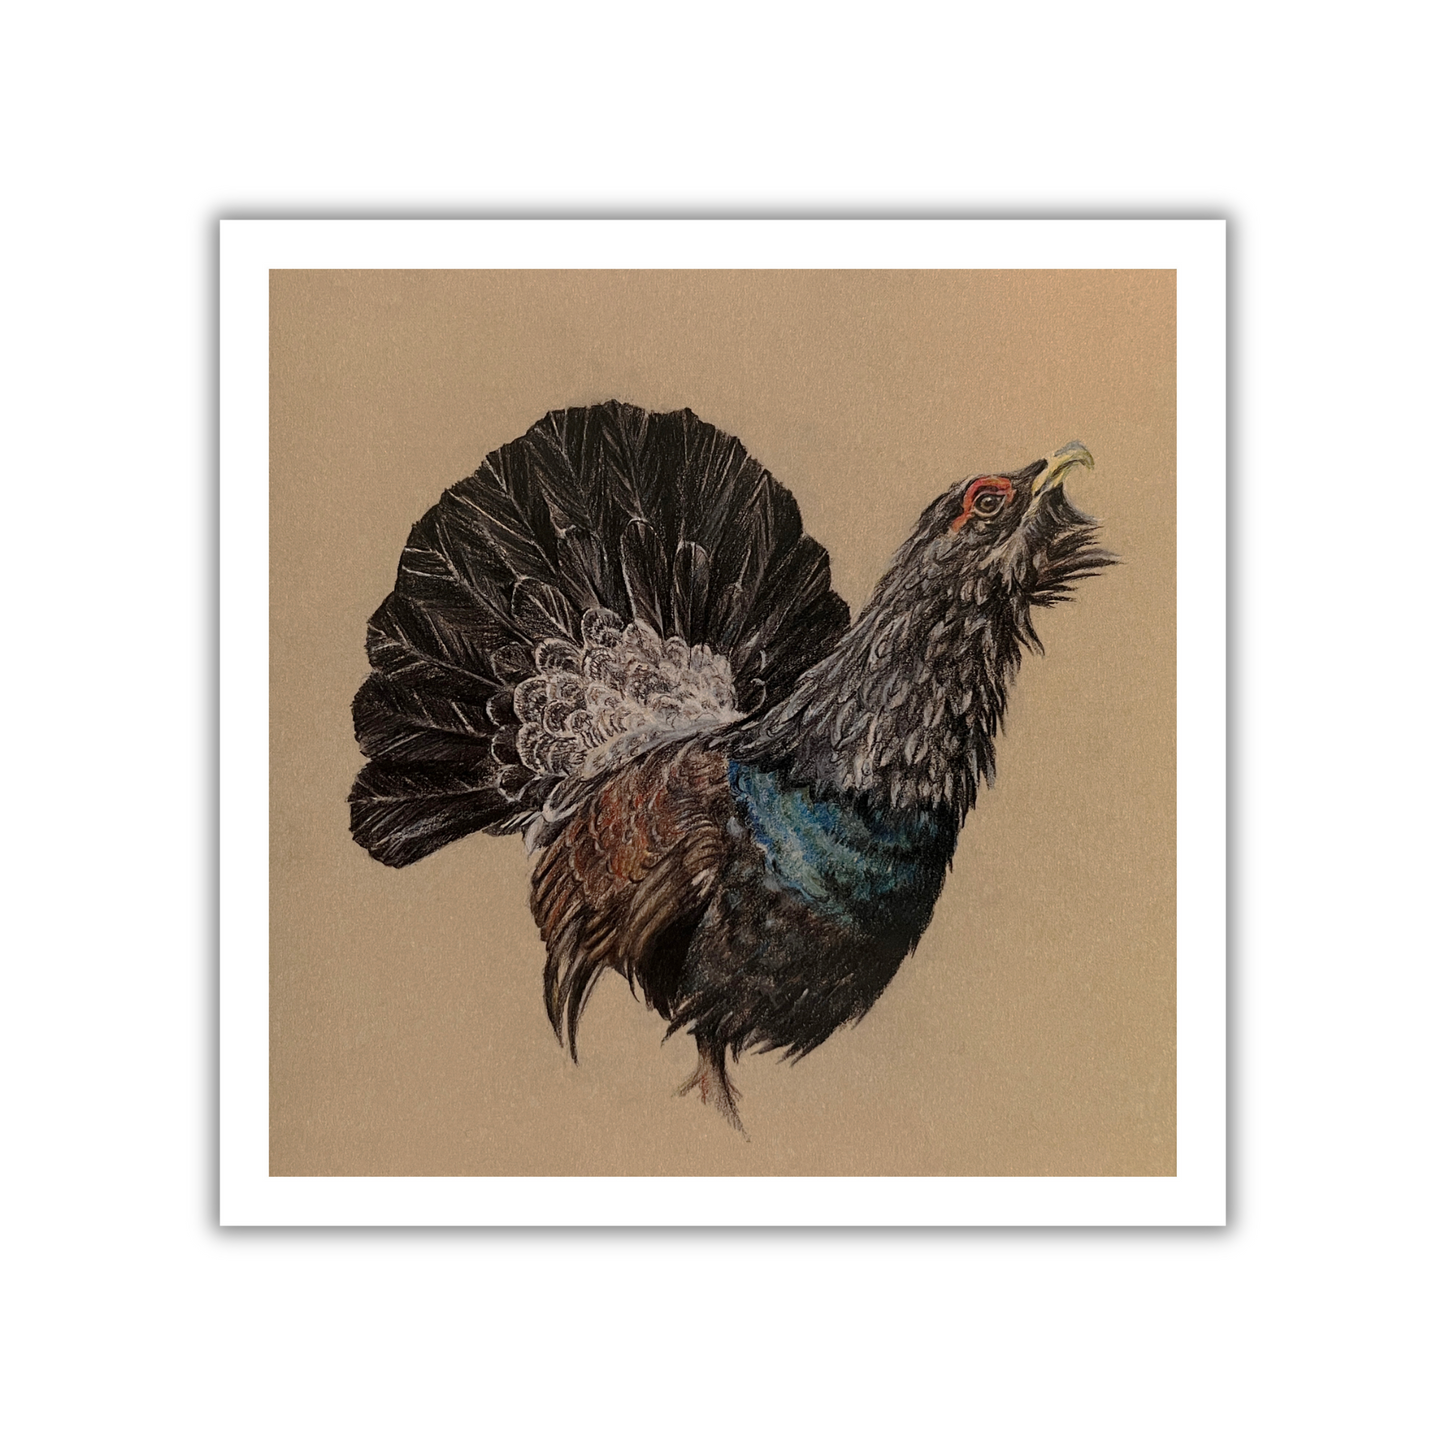 "Capercaillie" Signed Limited Edition Giclée Print